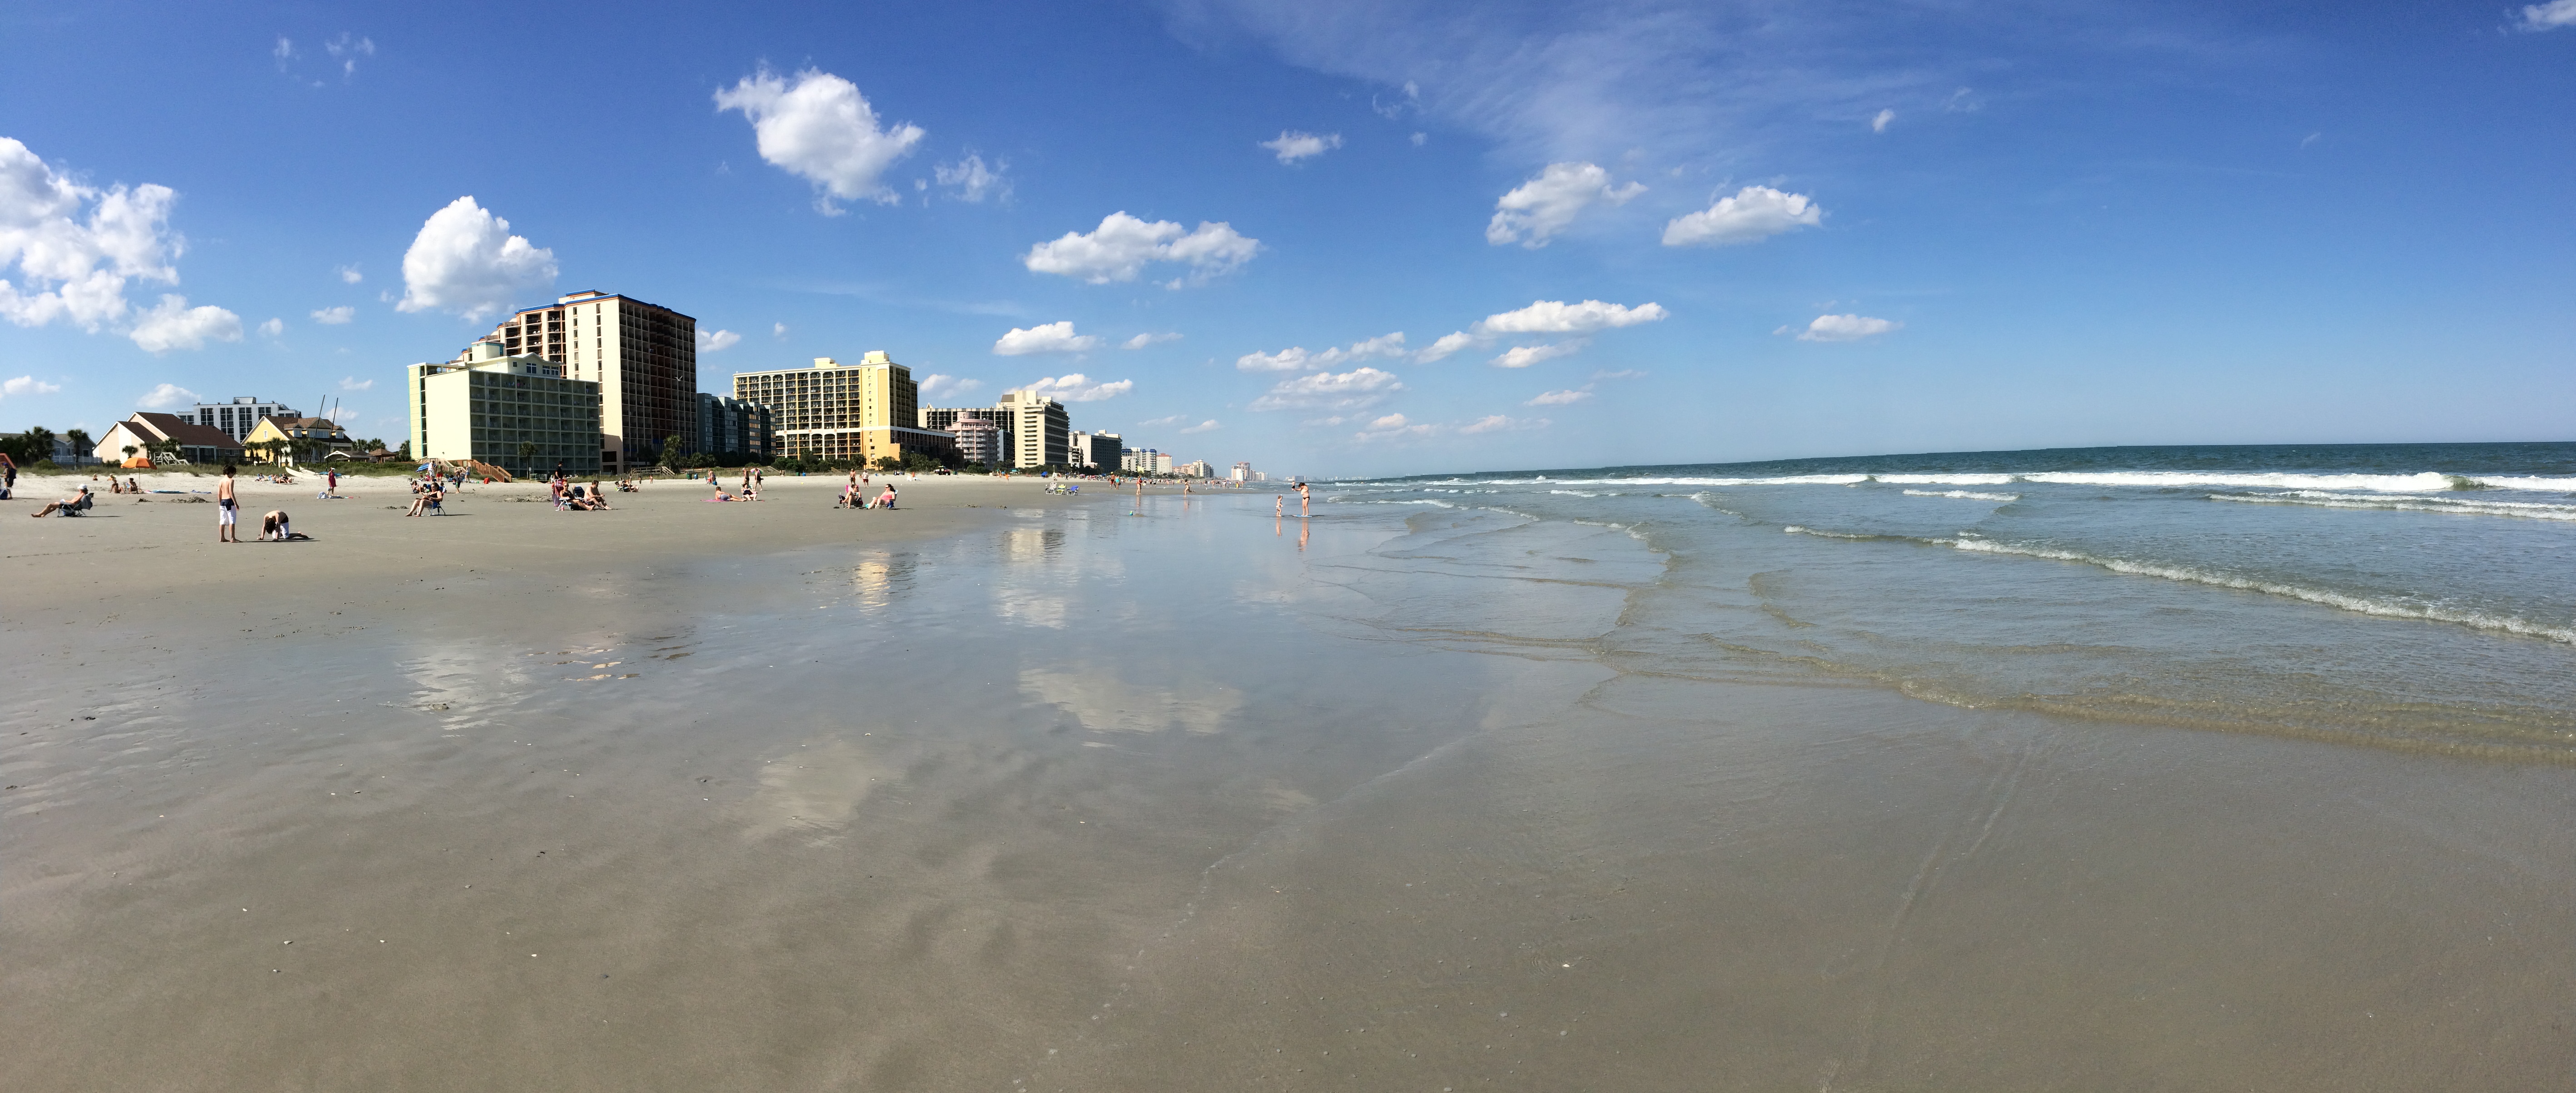 I took this panorama at the beach this afternoon here in Myrtle Beach, South Carolina,